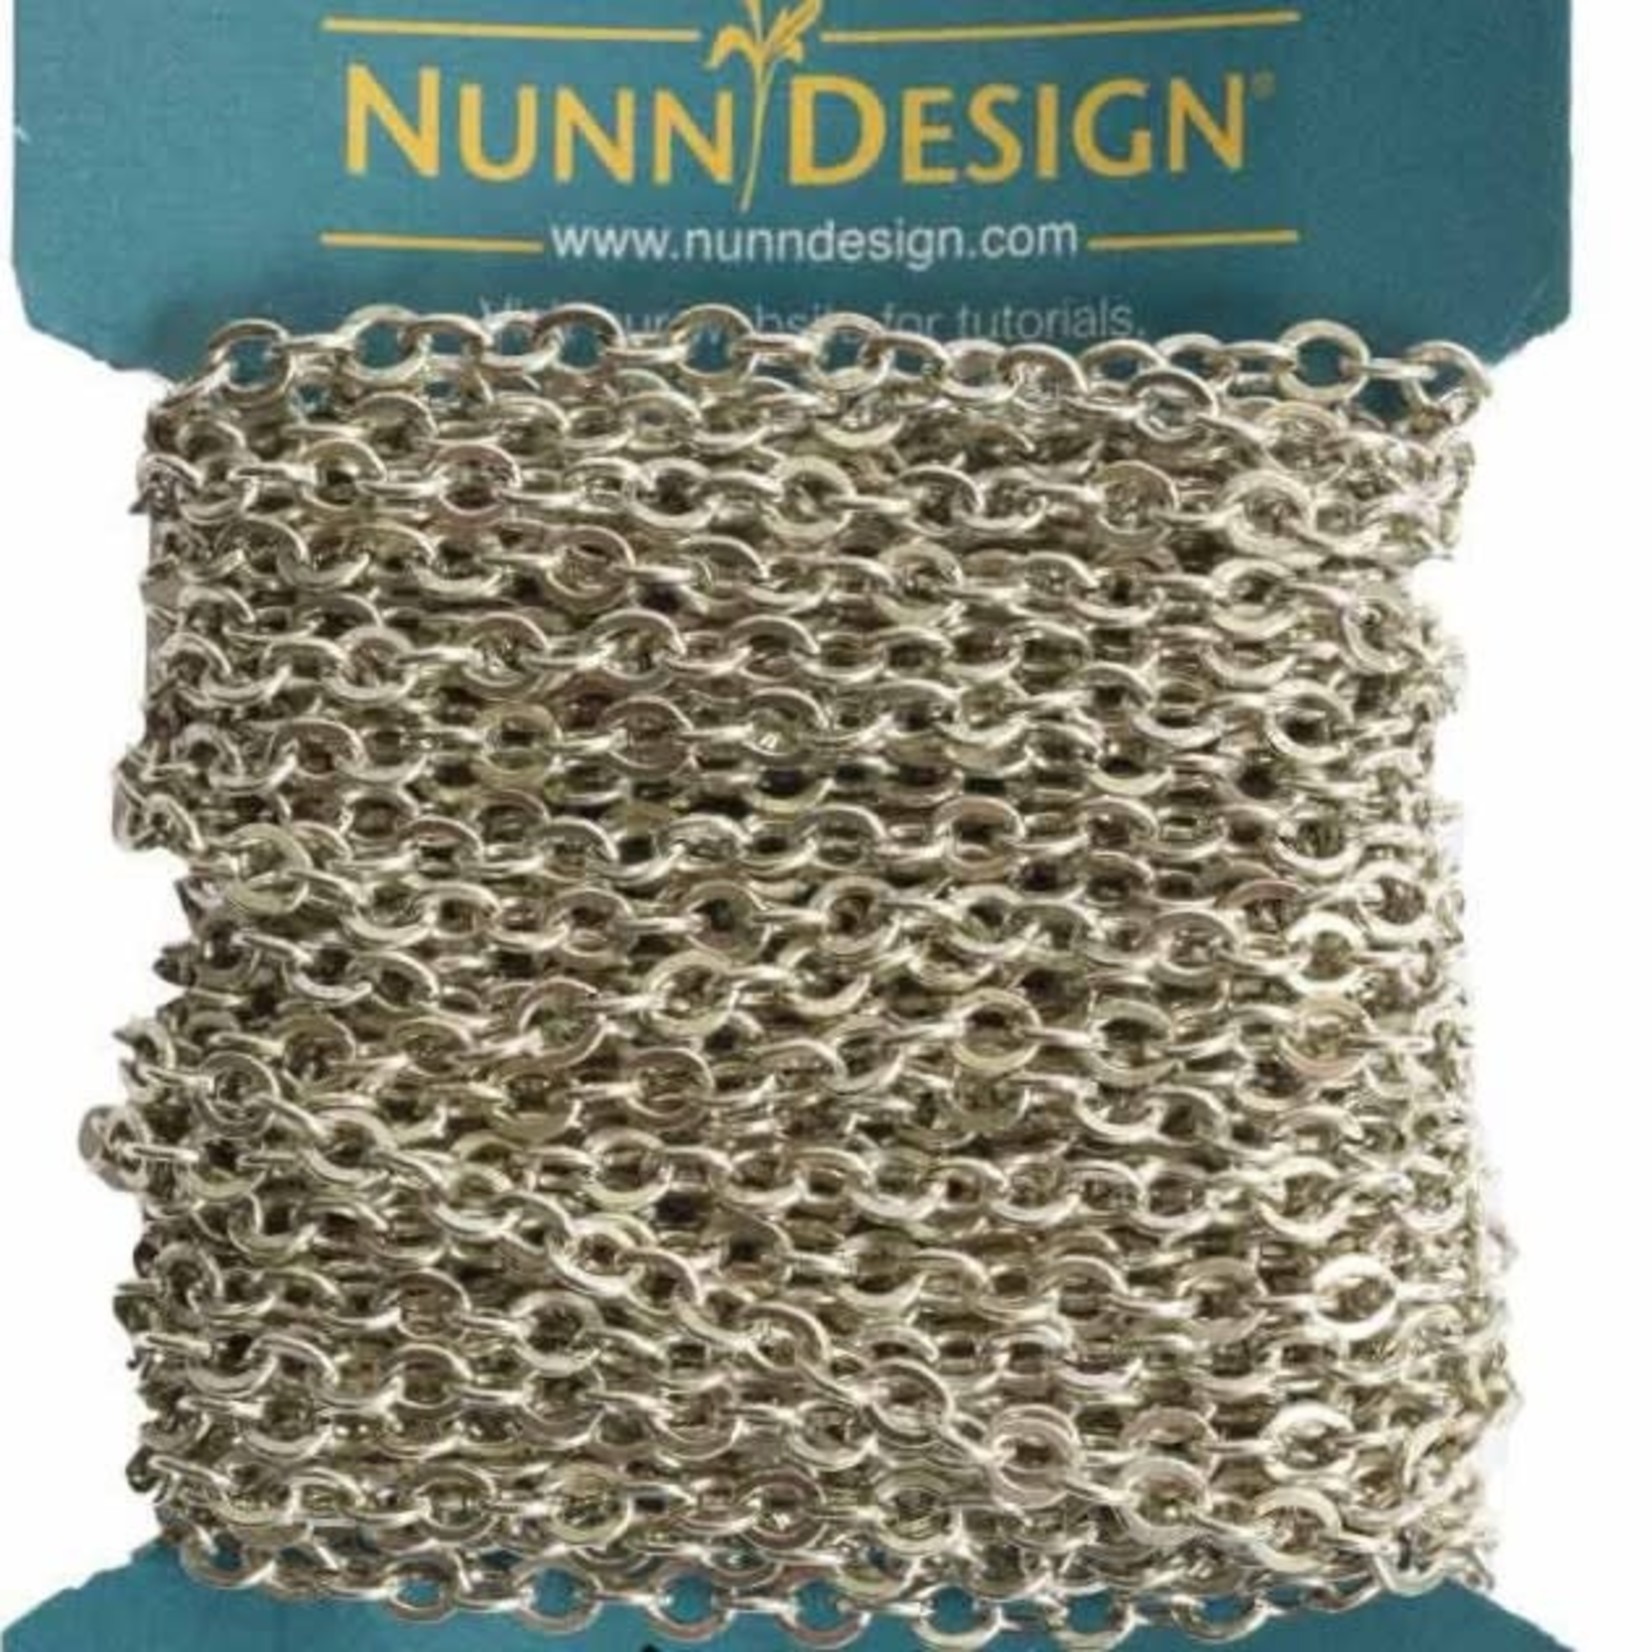 Nunn Design Small Hammered Flat Cable Chain - Antique Silver Plated